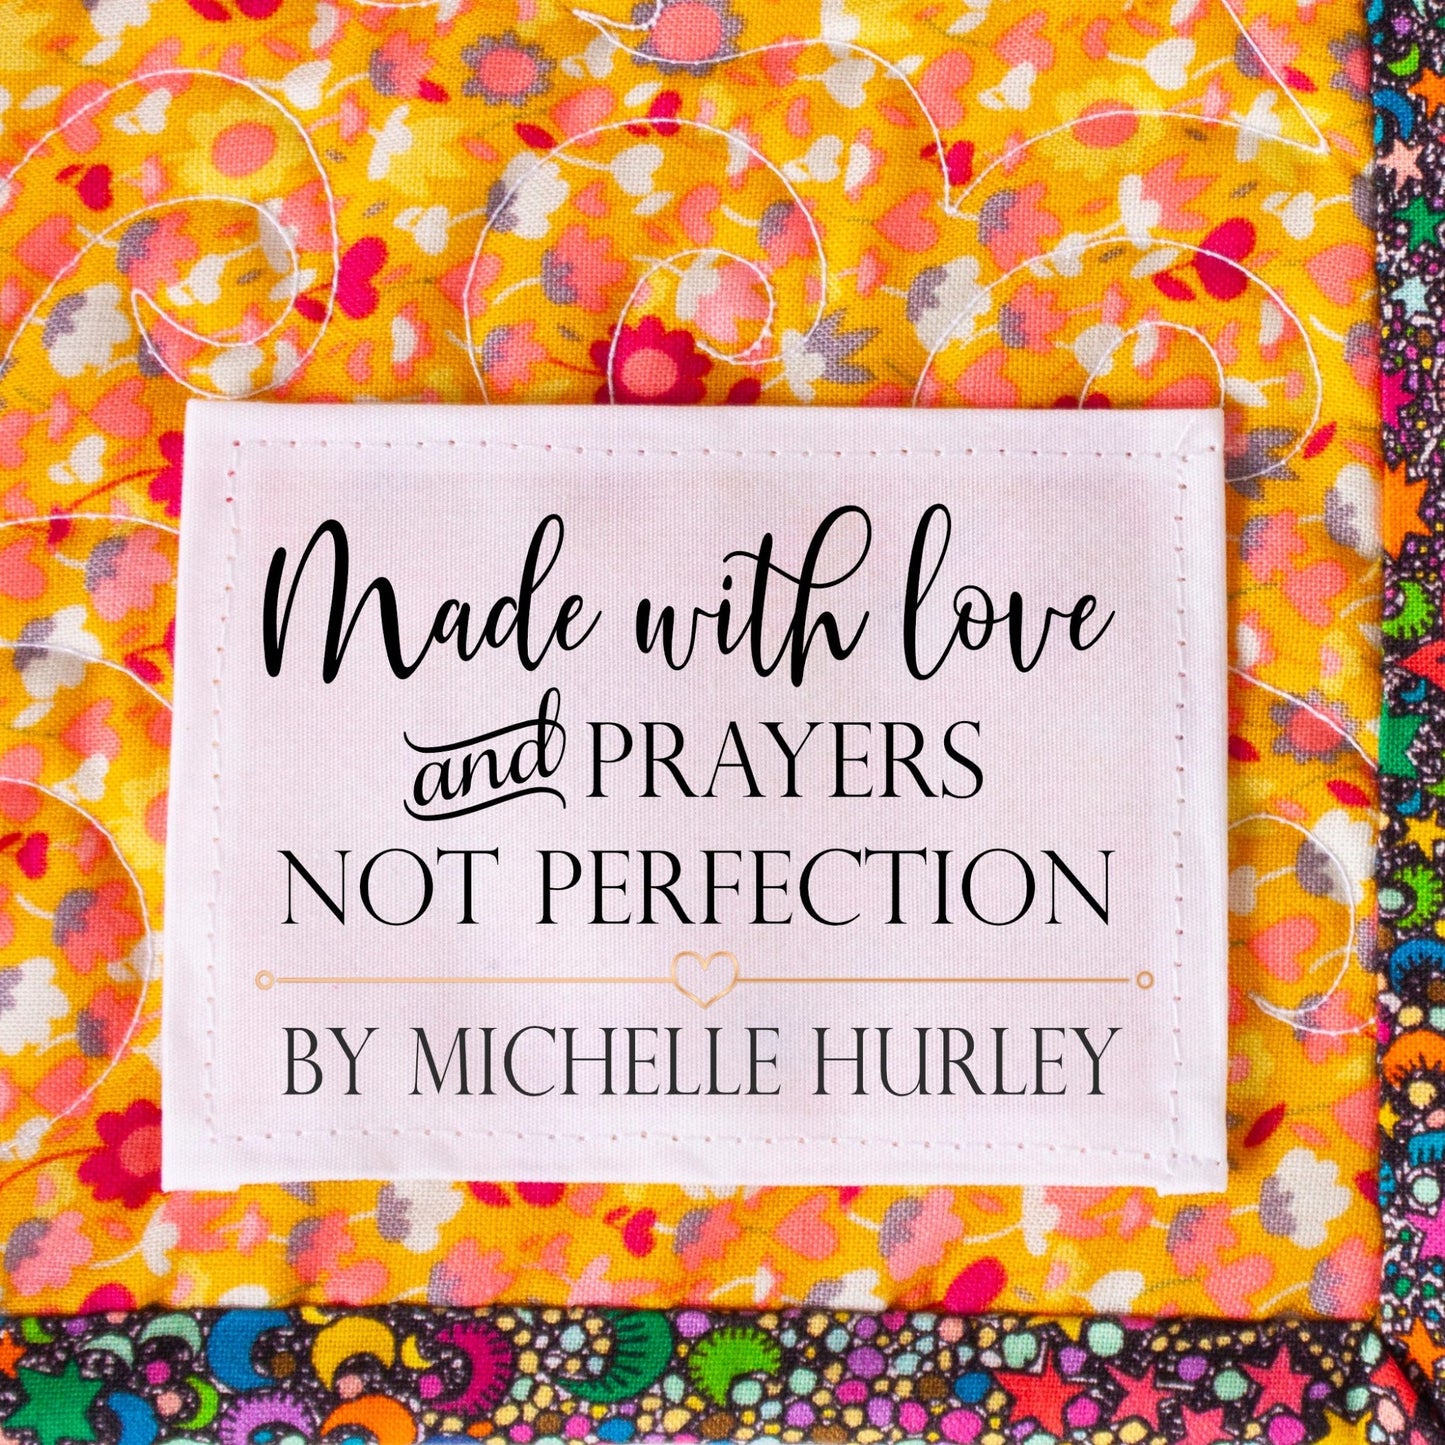 Love and Prayer Not Perfection - Jammin Threads